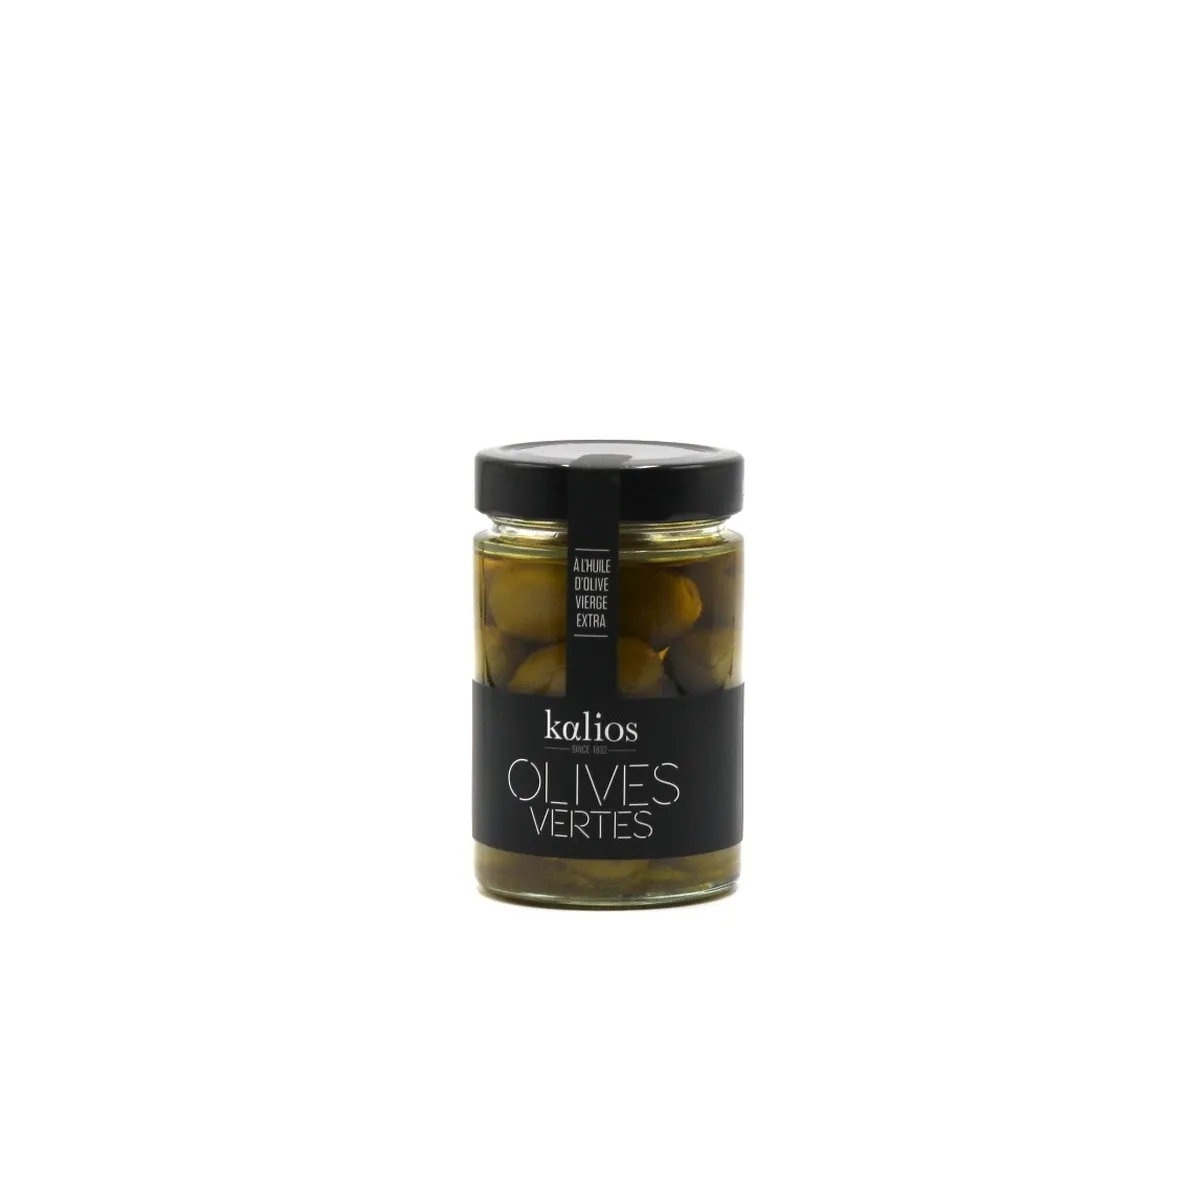 GREEN OLIVE WITH OLIVE OIL KALIOS 310 G